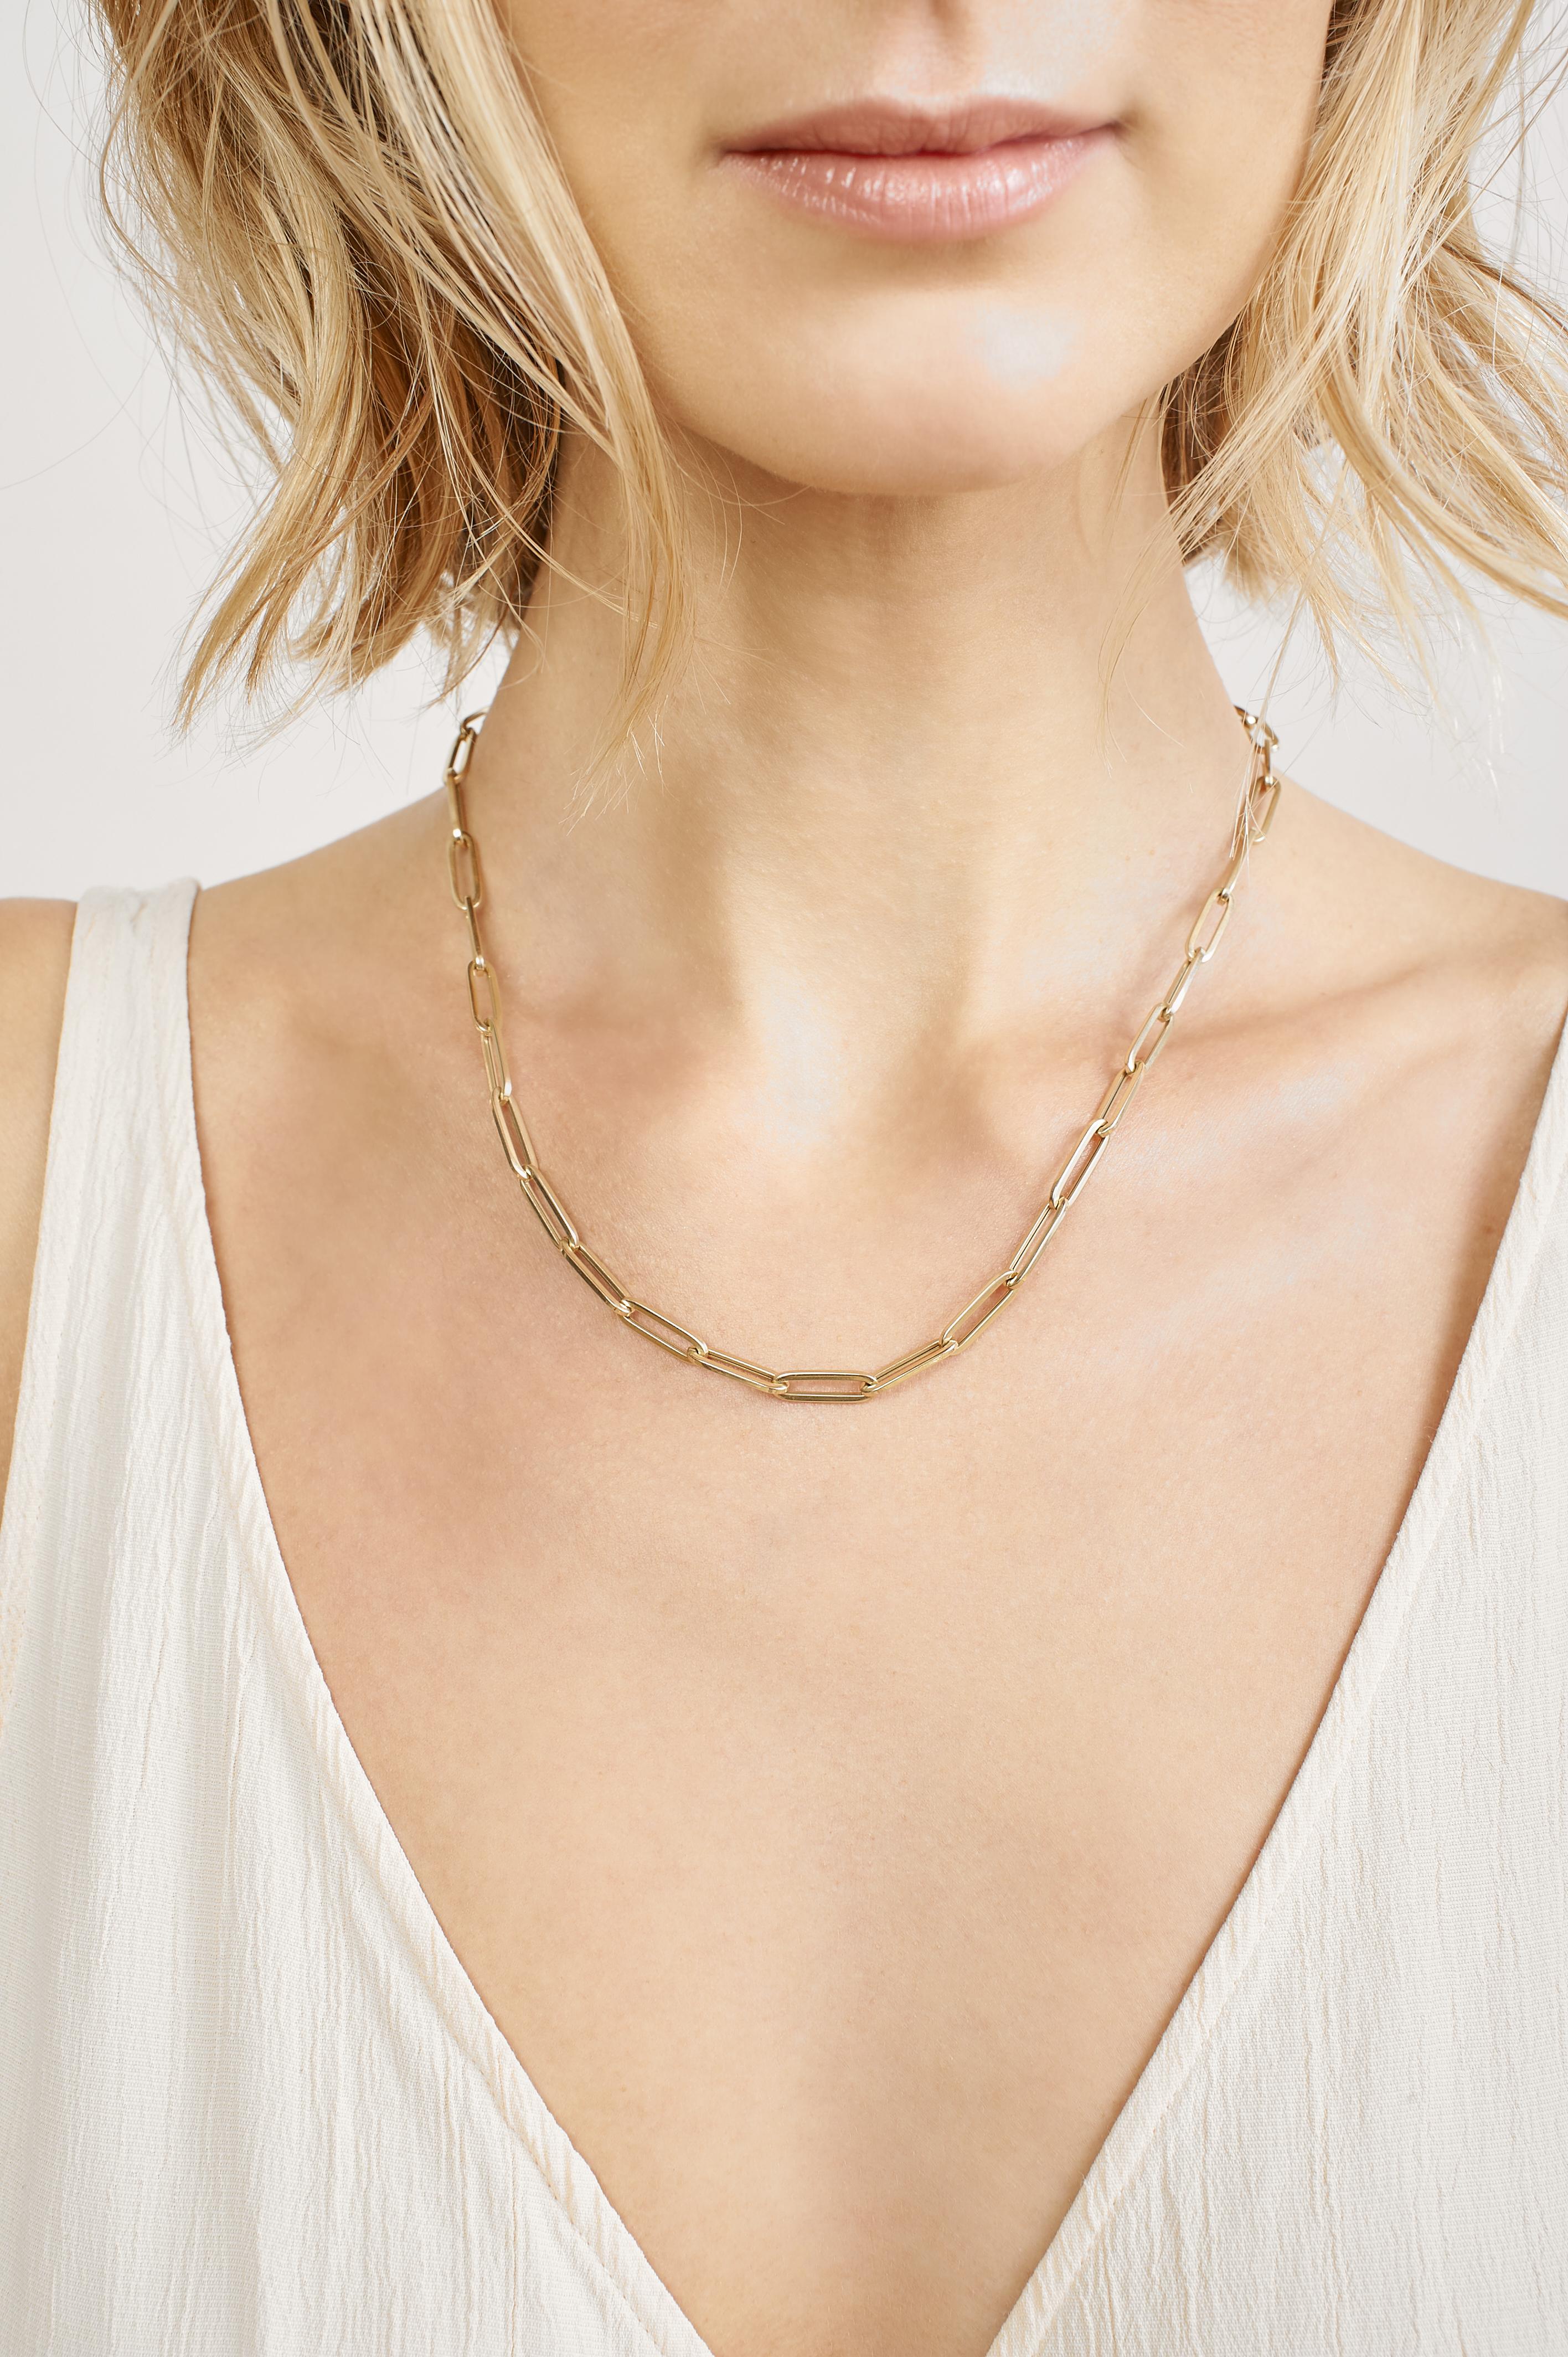 Paper Clip Chain Necklace in Solid 14 Karat Yellow Gold by Selin Kent In New Condition For Sale In New York, NY